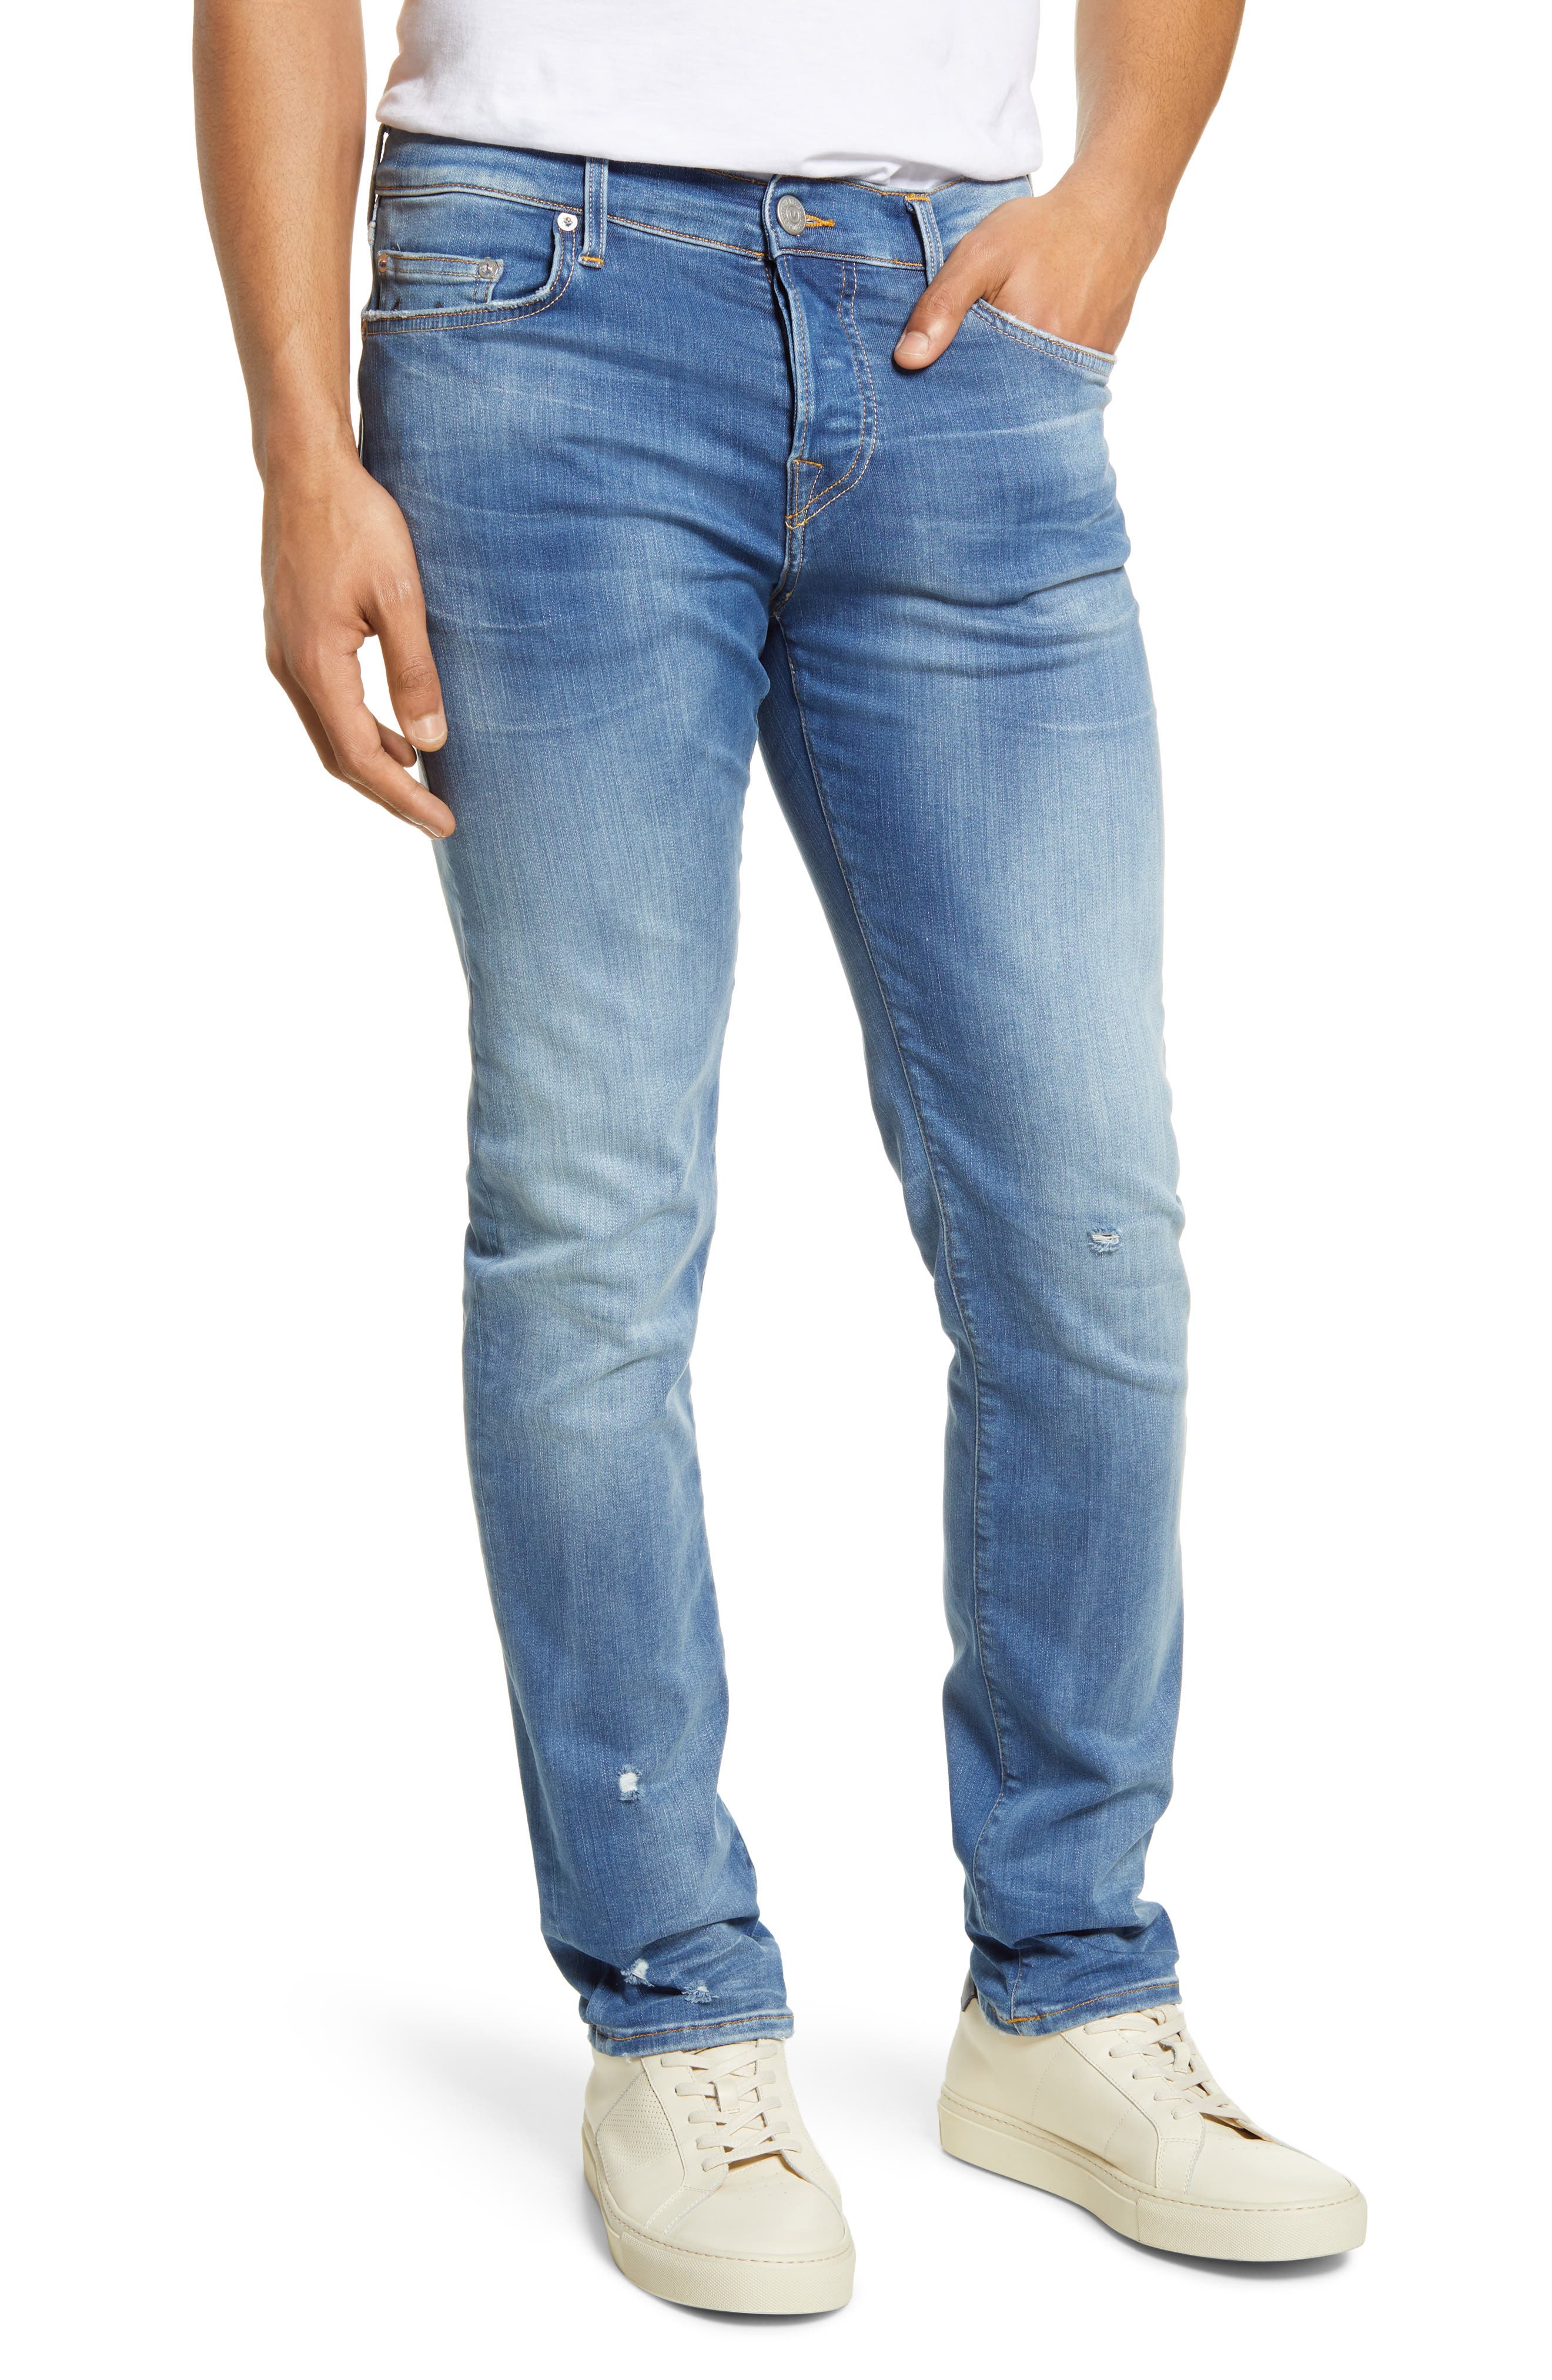 true religion jeans clearance sale